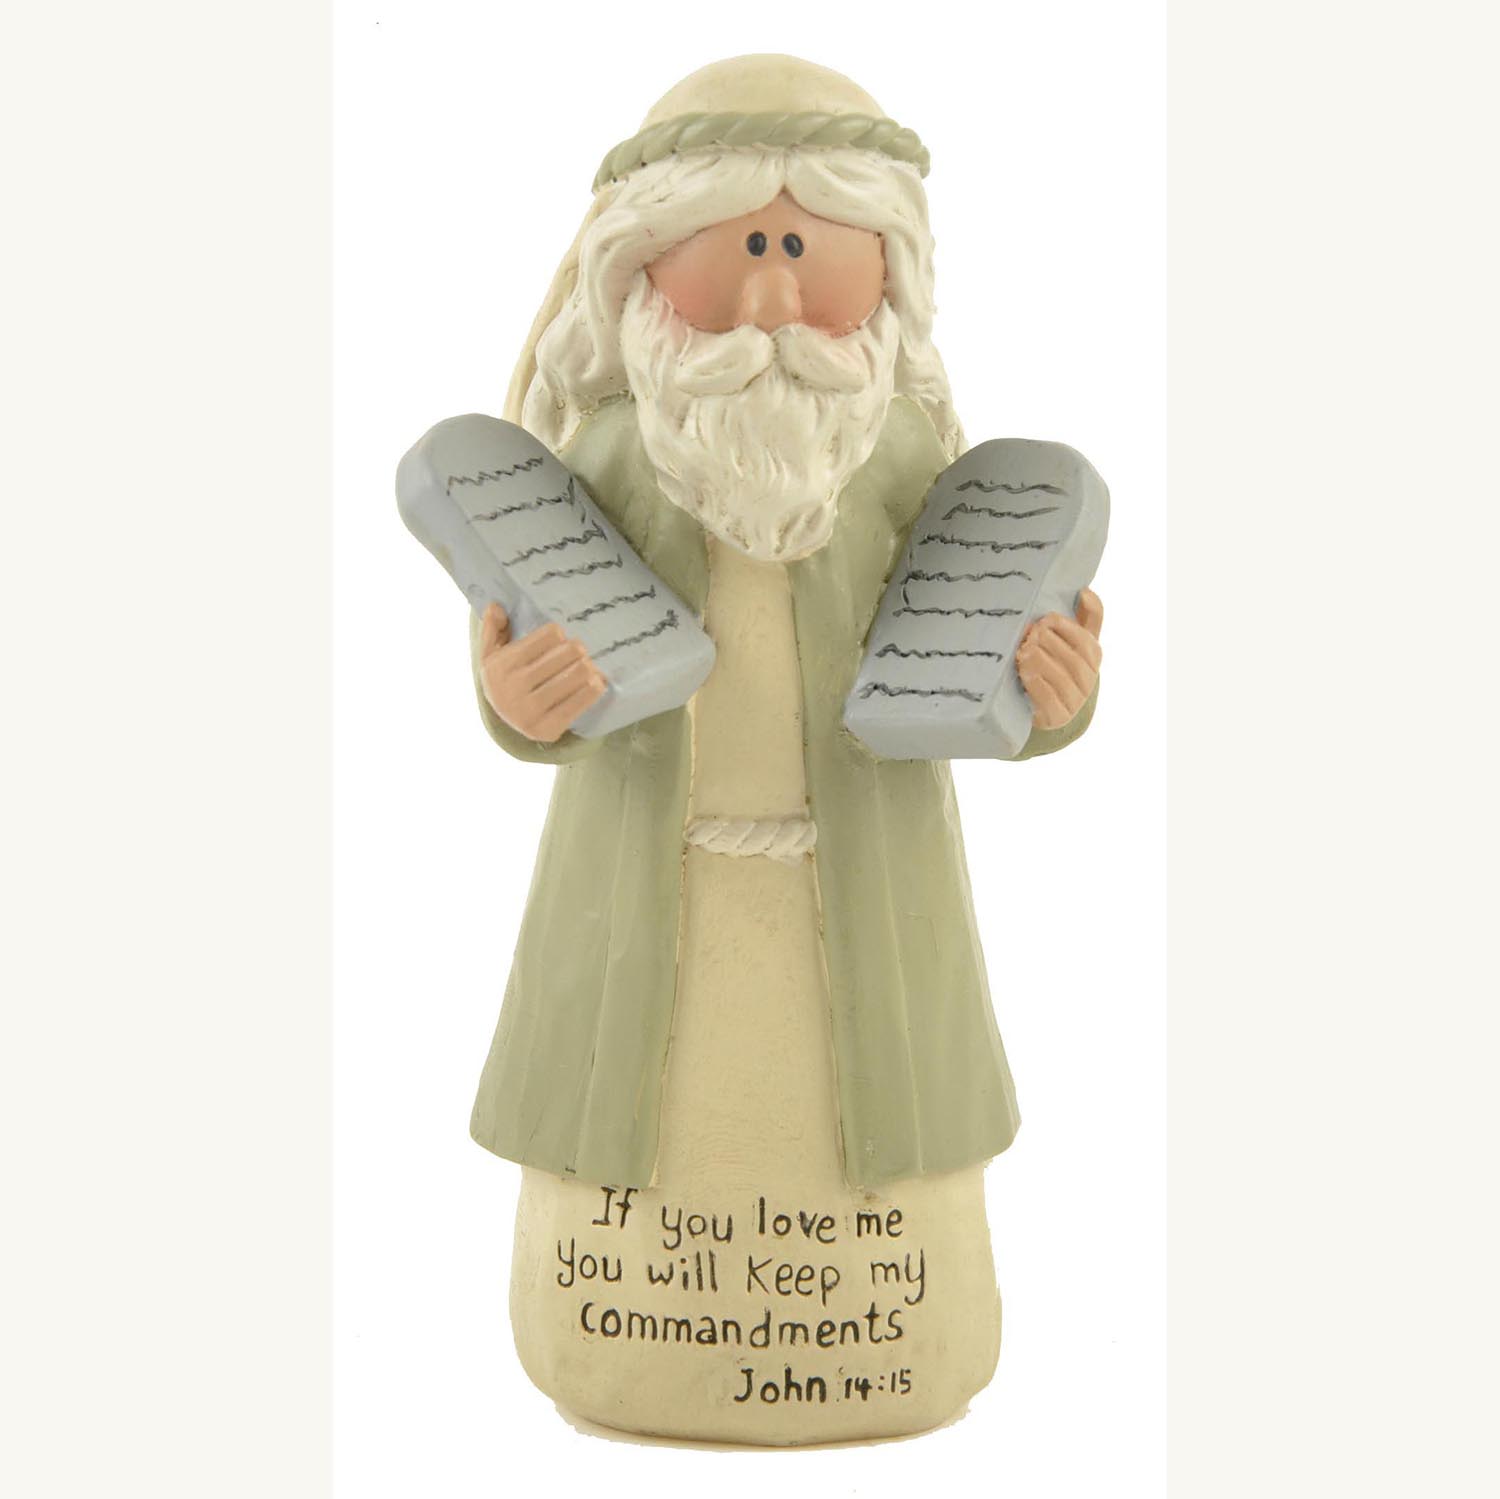 Divine Guidance: Moses with the Ten Commandments Resin Figurine 'IF YOU LOVE ME' MOSES W/COMMANDMENTS- A Testament of Faith and Obedience1211-87514